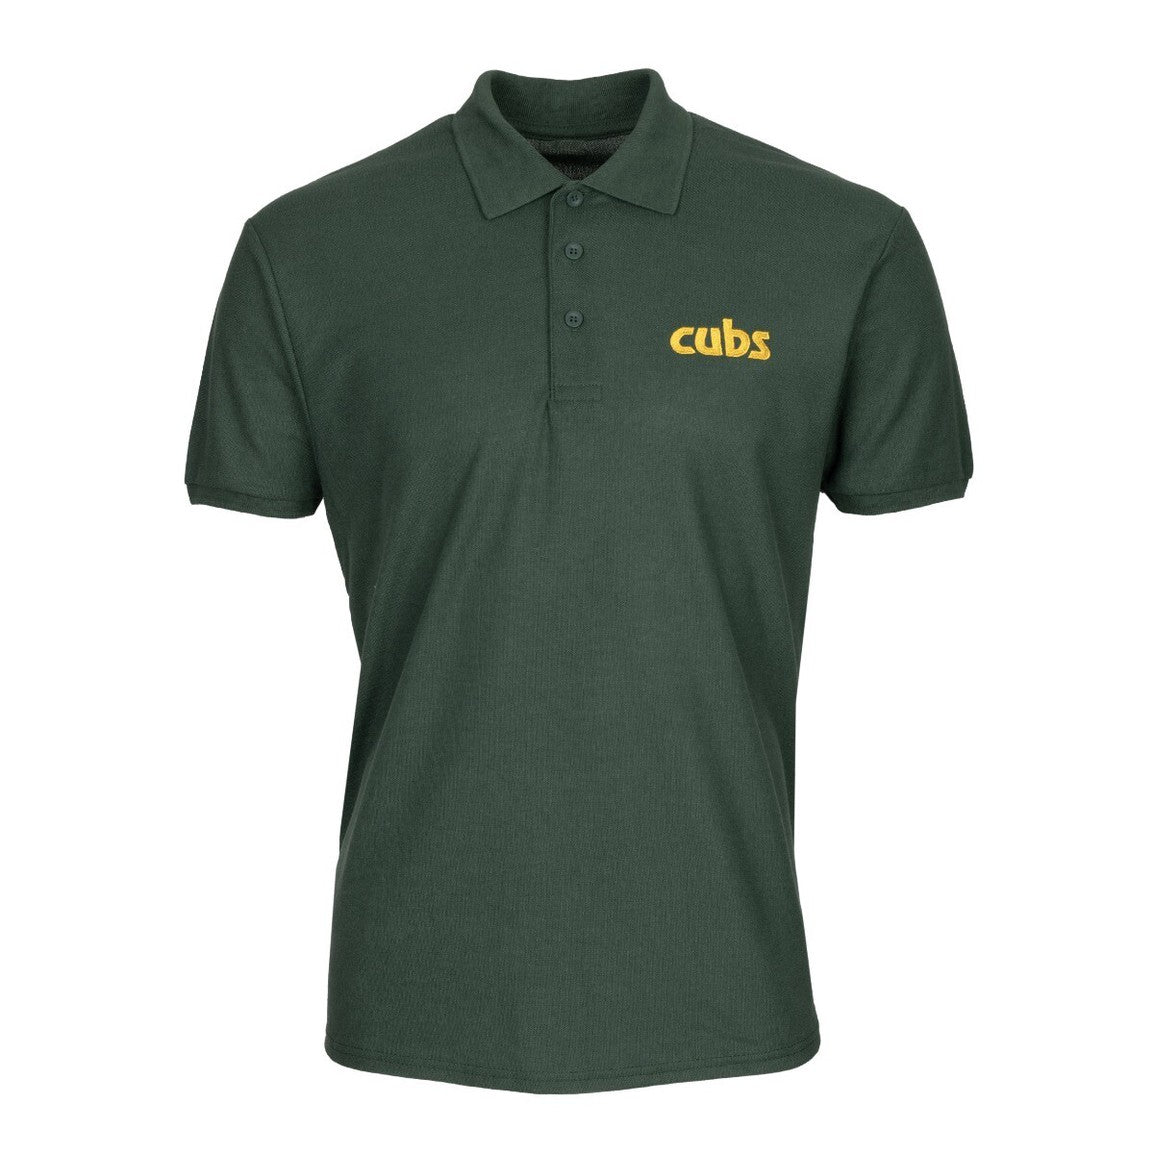 Cub Scouts Adult Polo Shirt